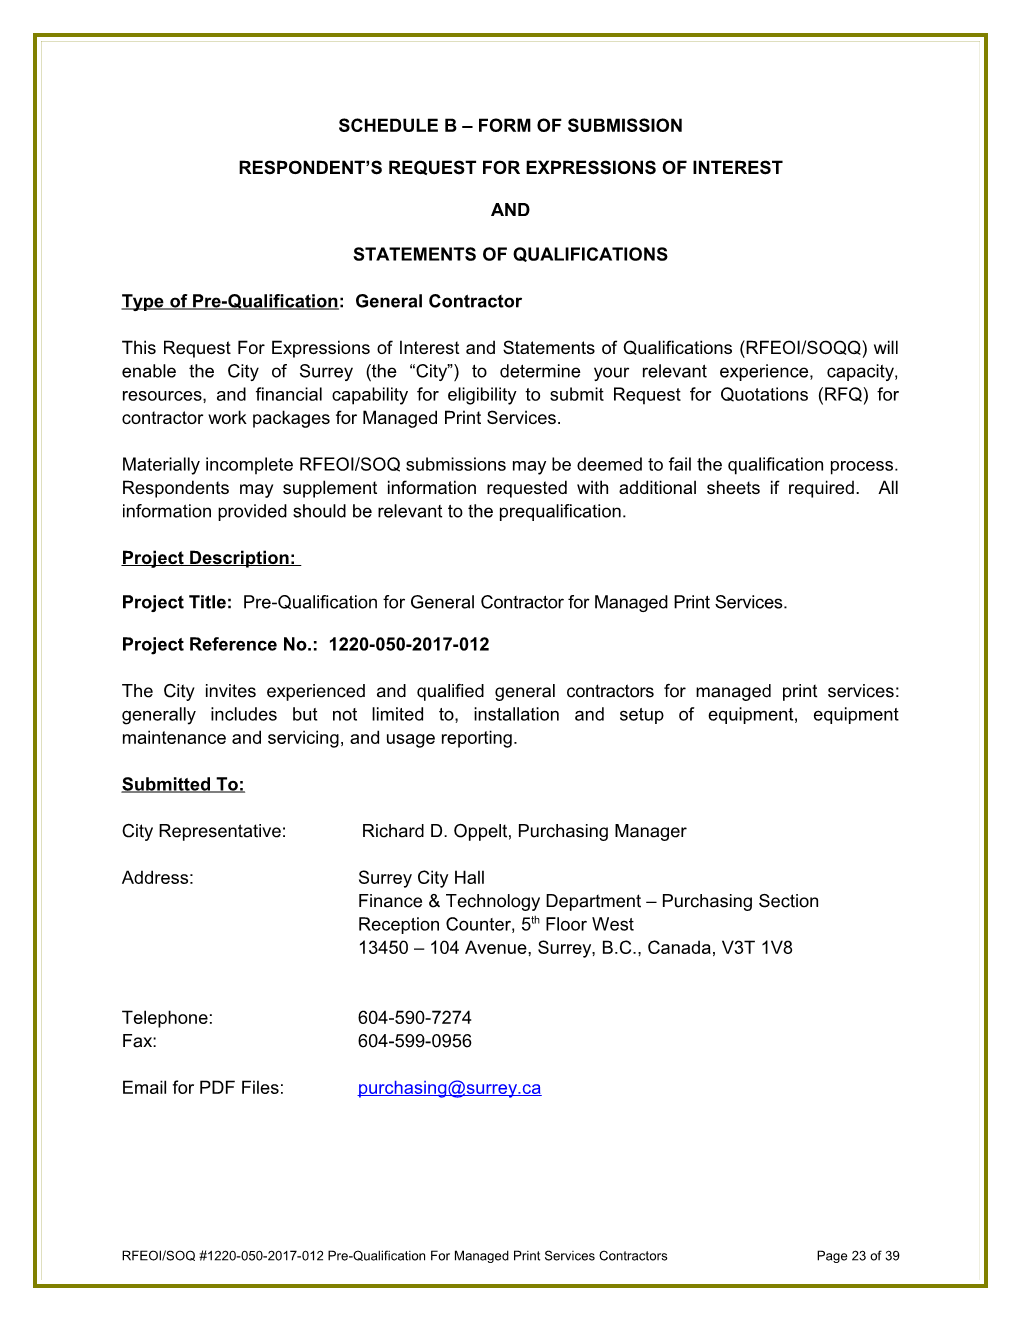 Respondent S Request for Expressions of Interest